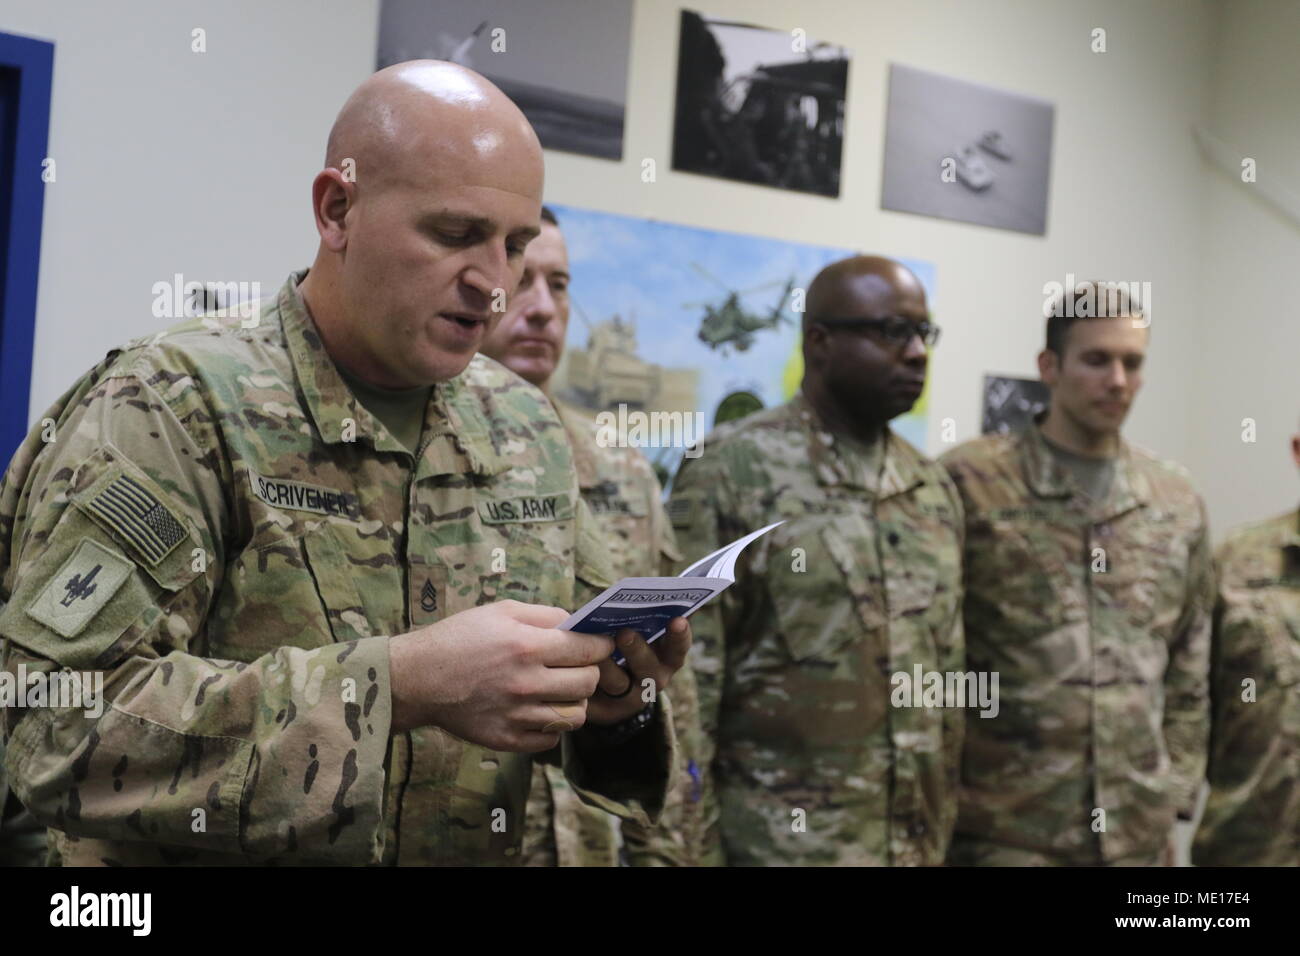 CAMP ARIFJAN, Kuwait – Sgt. First Class Kristopher Scrivener, 35th Infantry Division, reads Staff Sgt. James Ira “Junior” Spurrier’s official Medal of Honor citation at the dedication of the Spurrier Conference Room at the 35th Inf. Div.’s forward deployed headquarters building Dec. 22, 2017. (U.S. Army photo by Master Sgt. Mark Hanson) Stock Photo